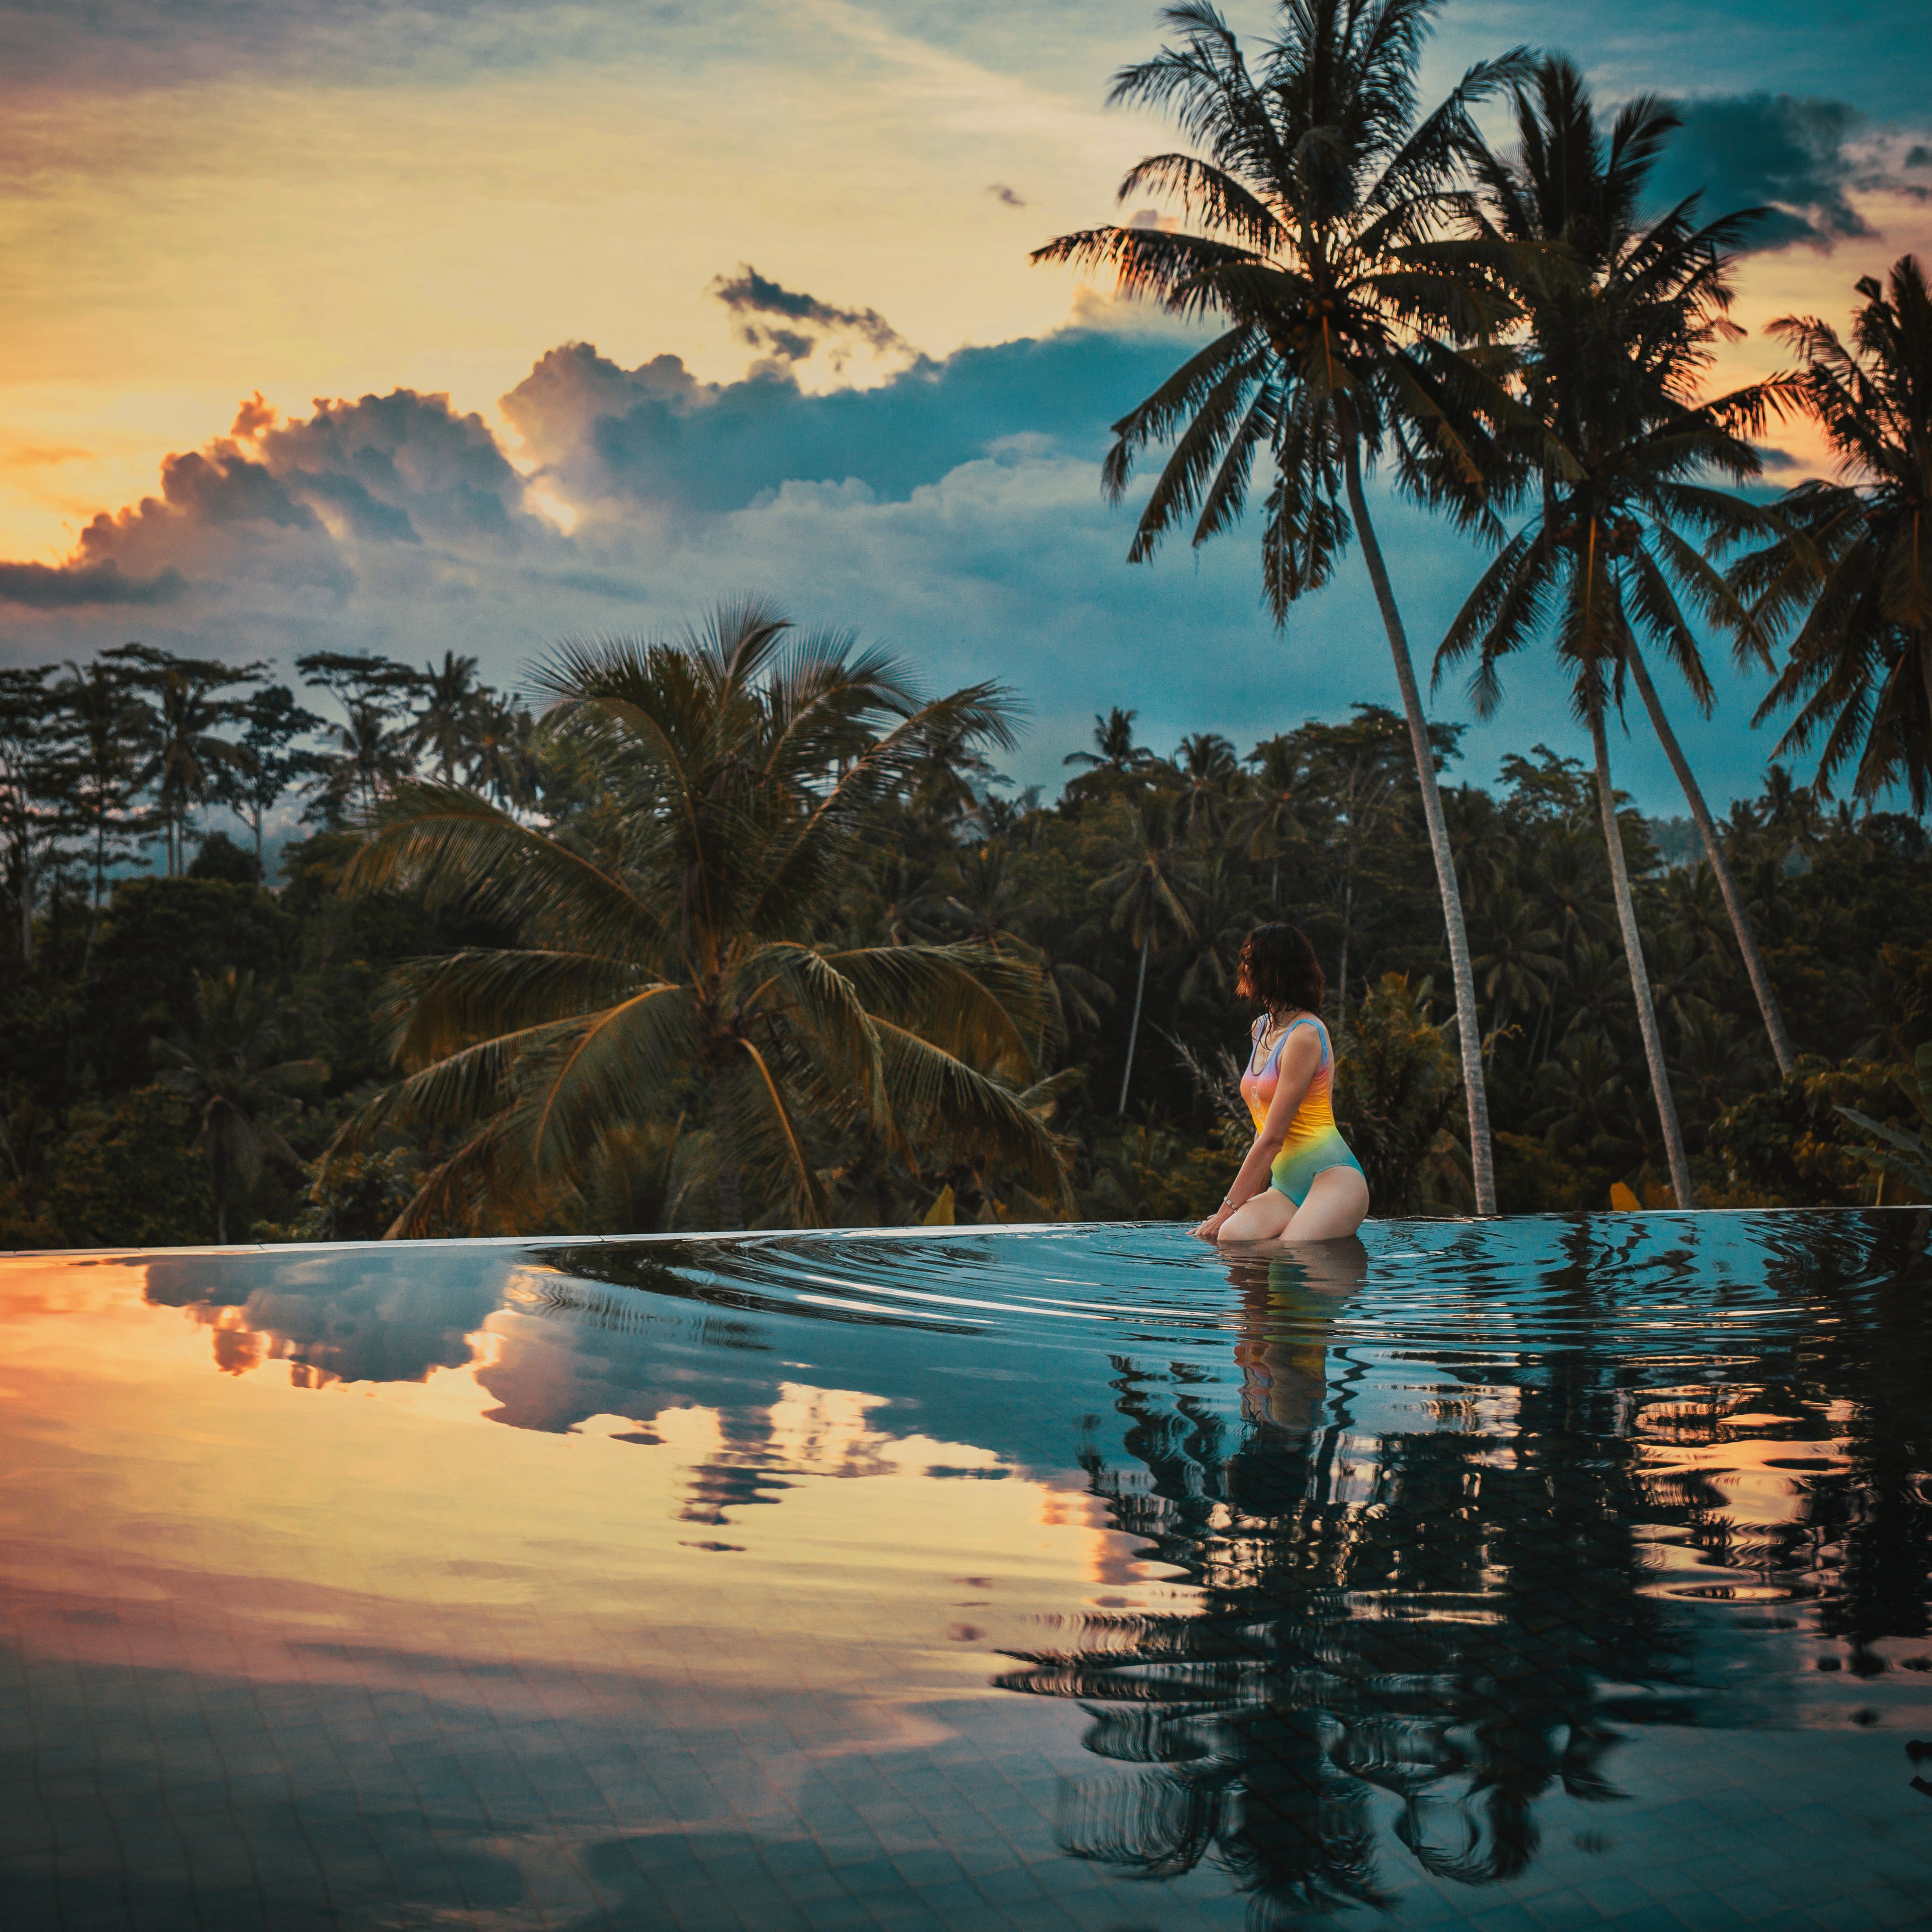 Woman in pool at sunset with jungle in background